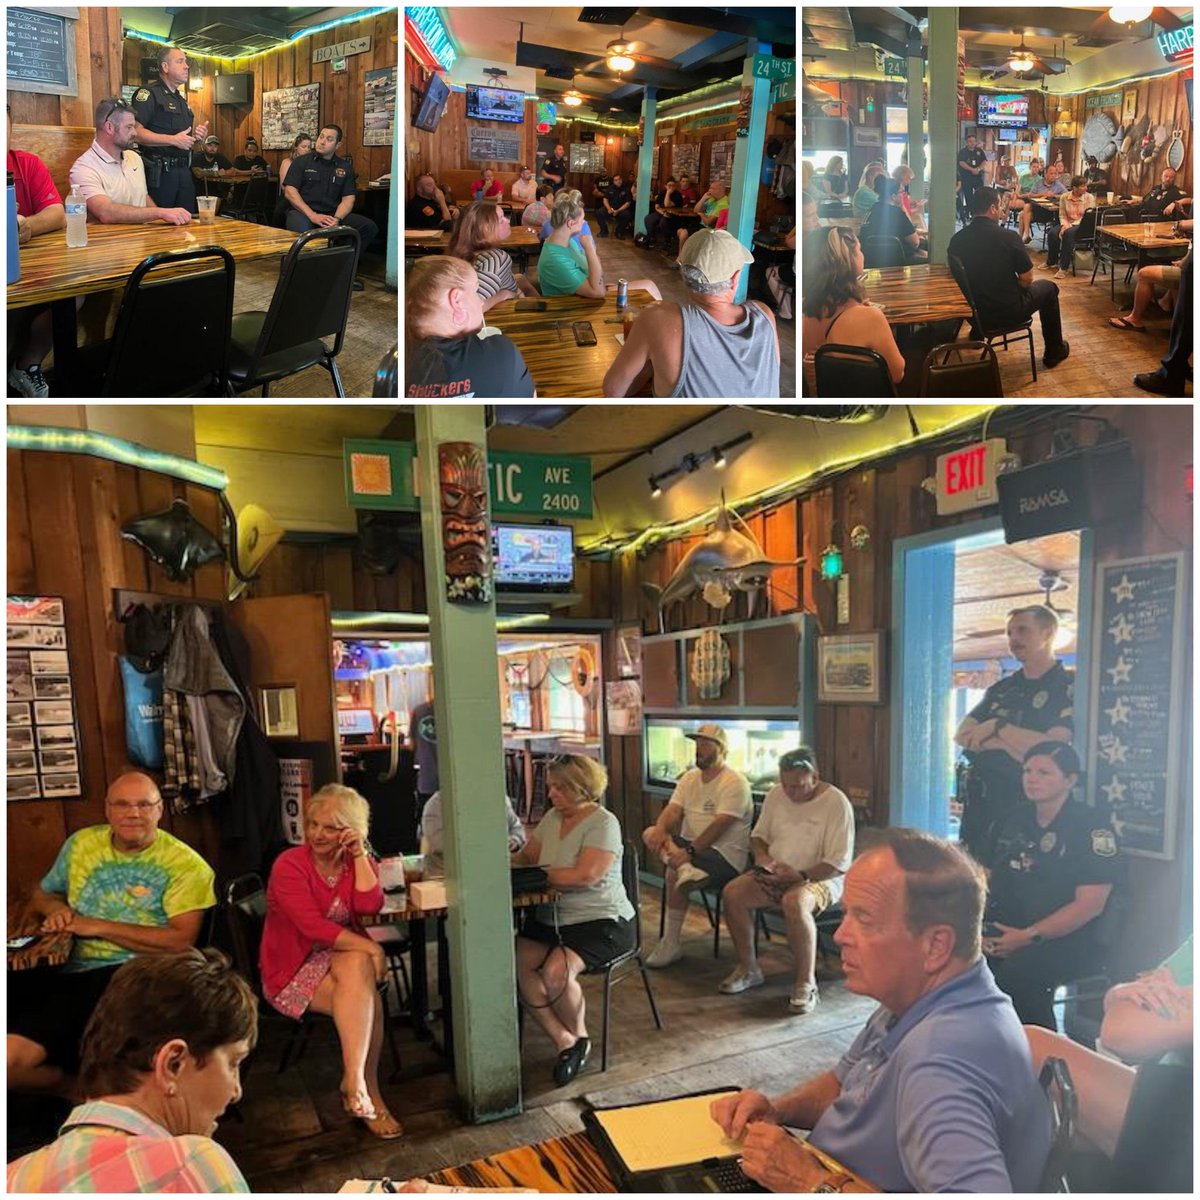 Outstanding bar and restaurant owners/managers meeting today at Harpoon Larry's. Reducing crime and providing a safe environment at the oceanfront takes teamwork! #togetherwearebetter